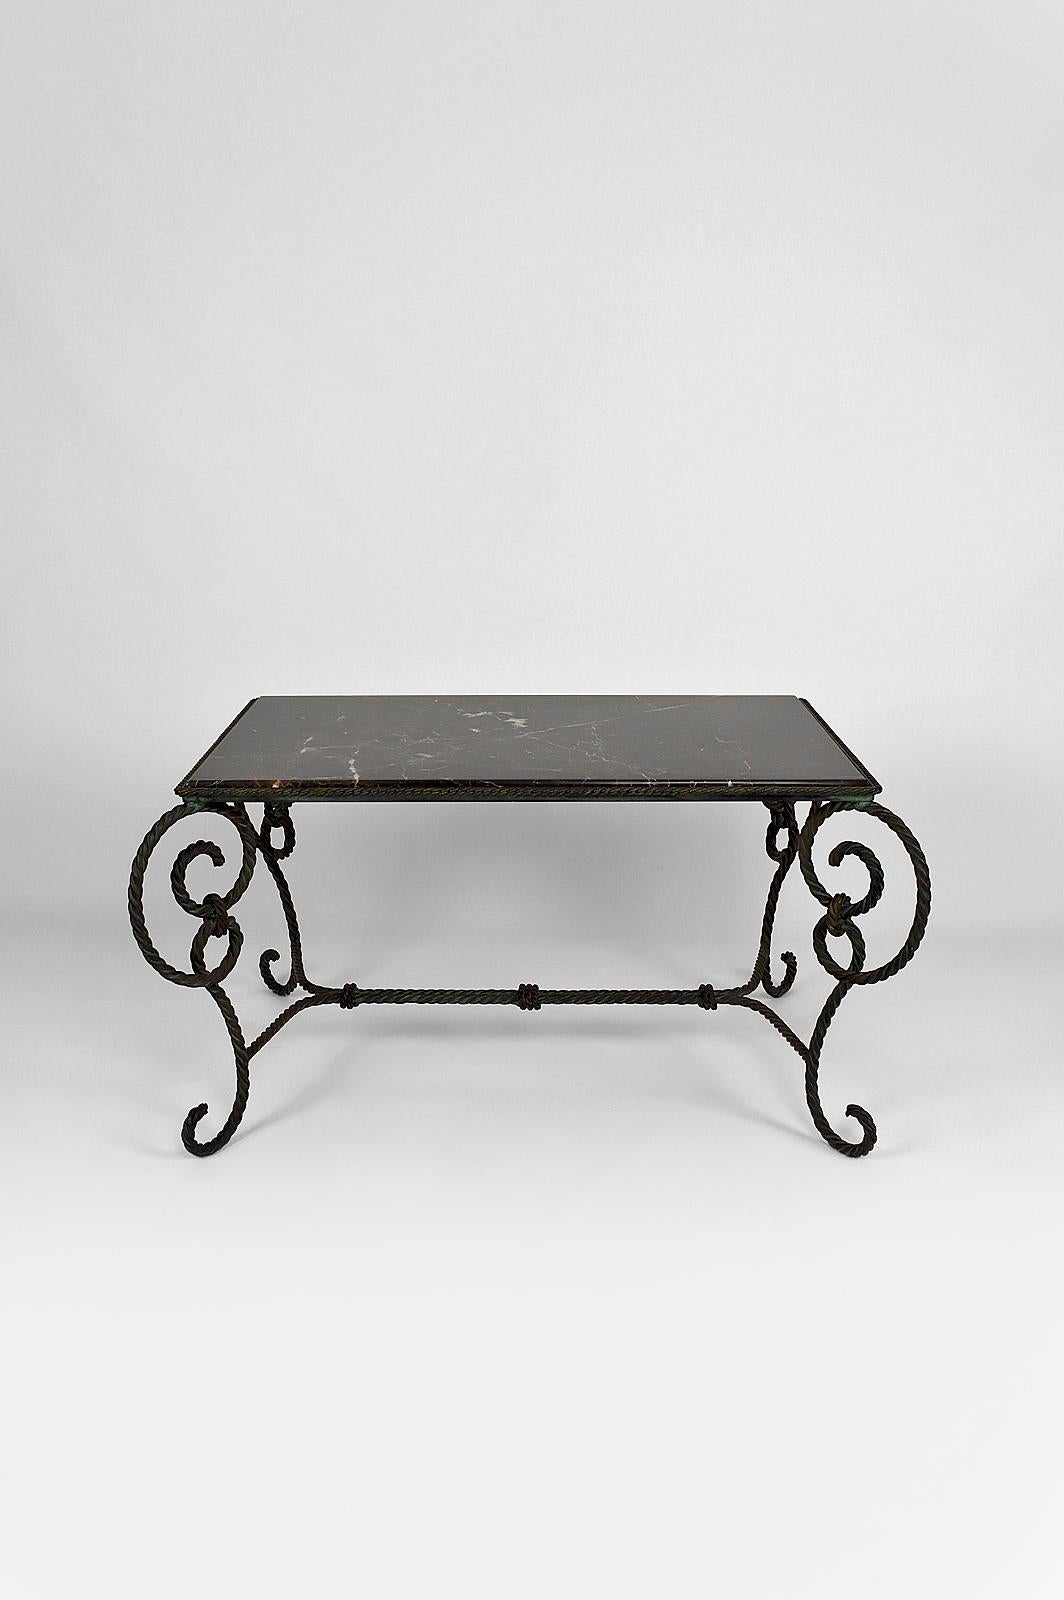 Elegant rectangular coffee table composed of a black marble top and a twisted multi-strand wrought iron base imitating ropes.
Beautiful antique bronze / verdigris patina.

Art Deco, France, circa 1940-1950.

In very good condition.

Dimensions